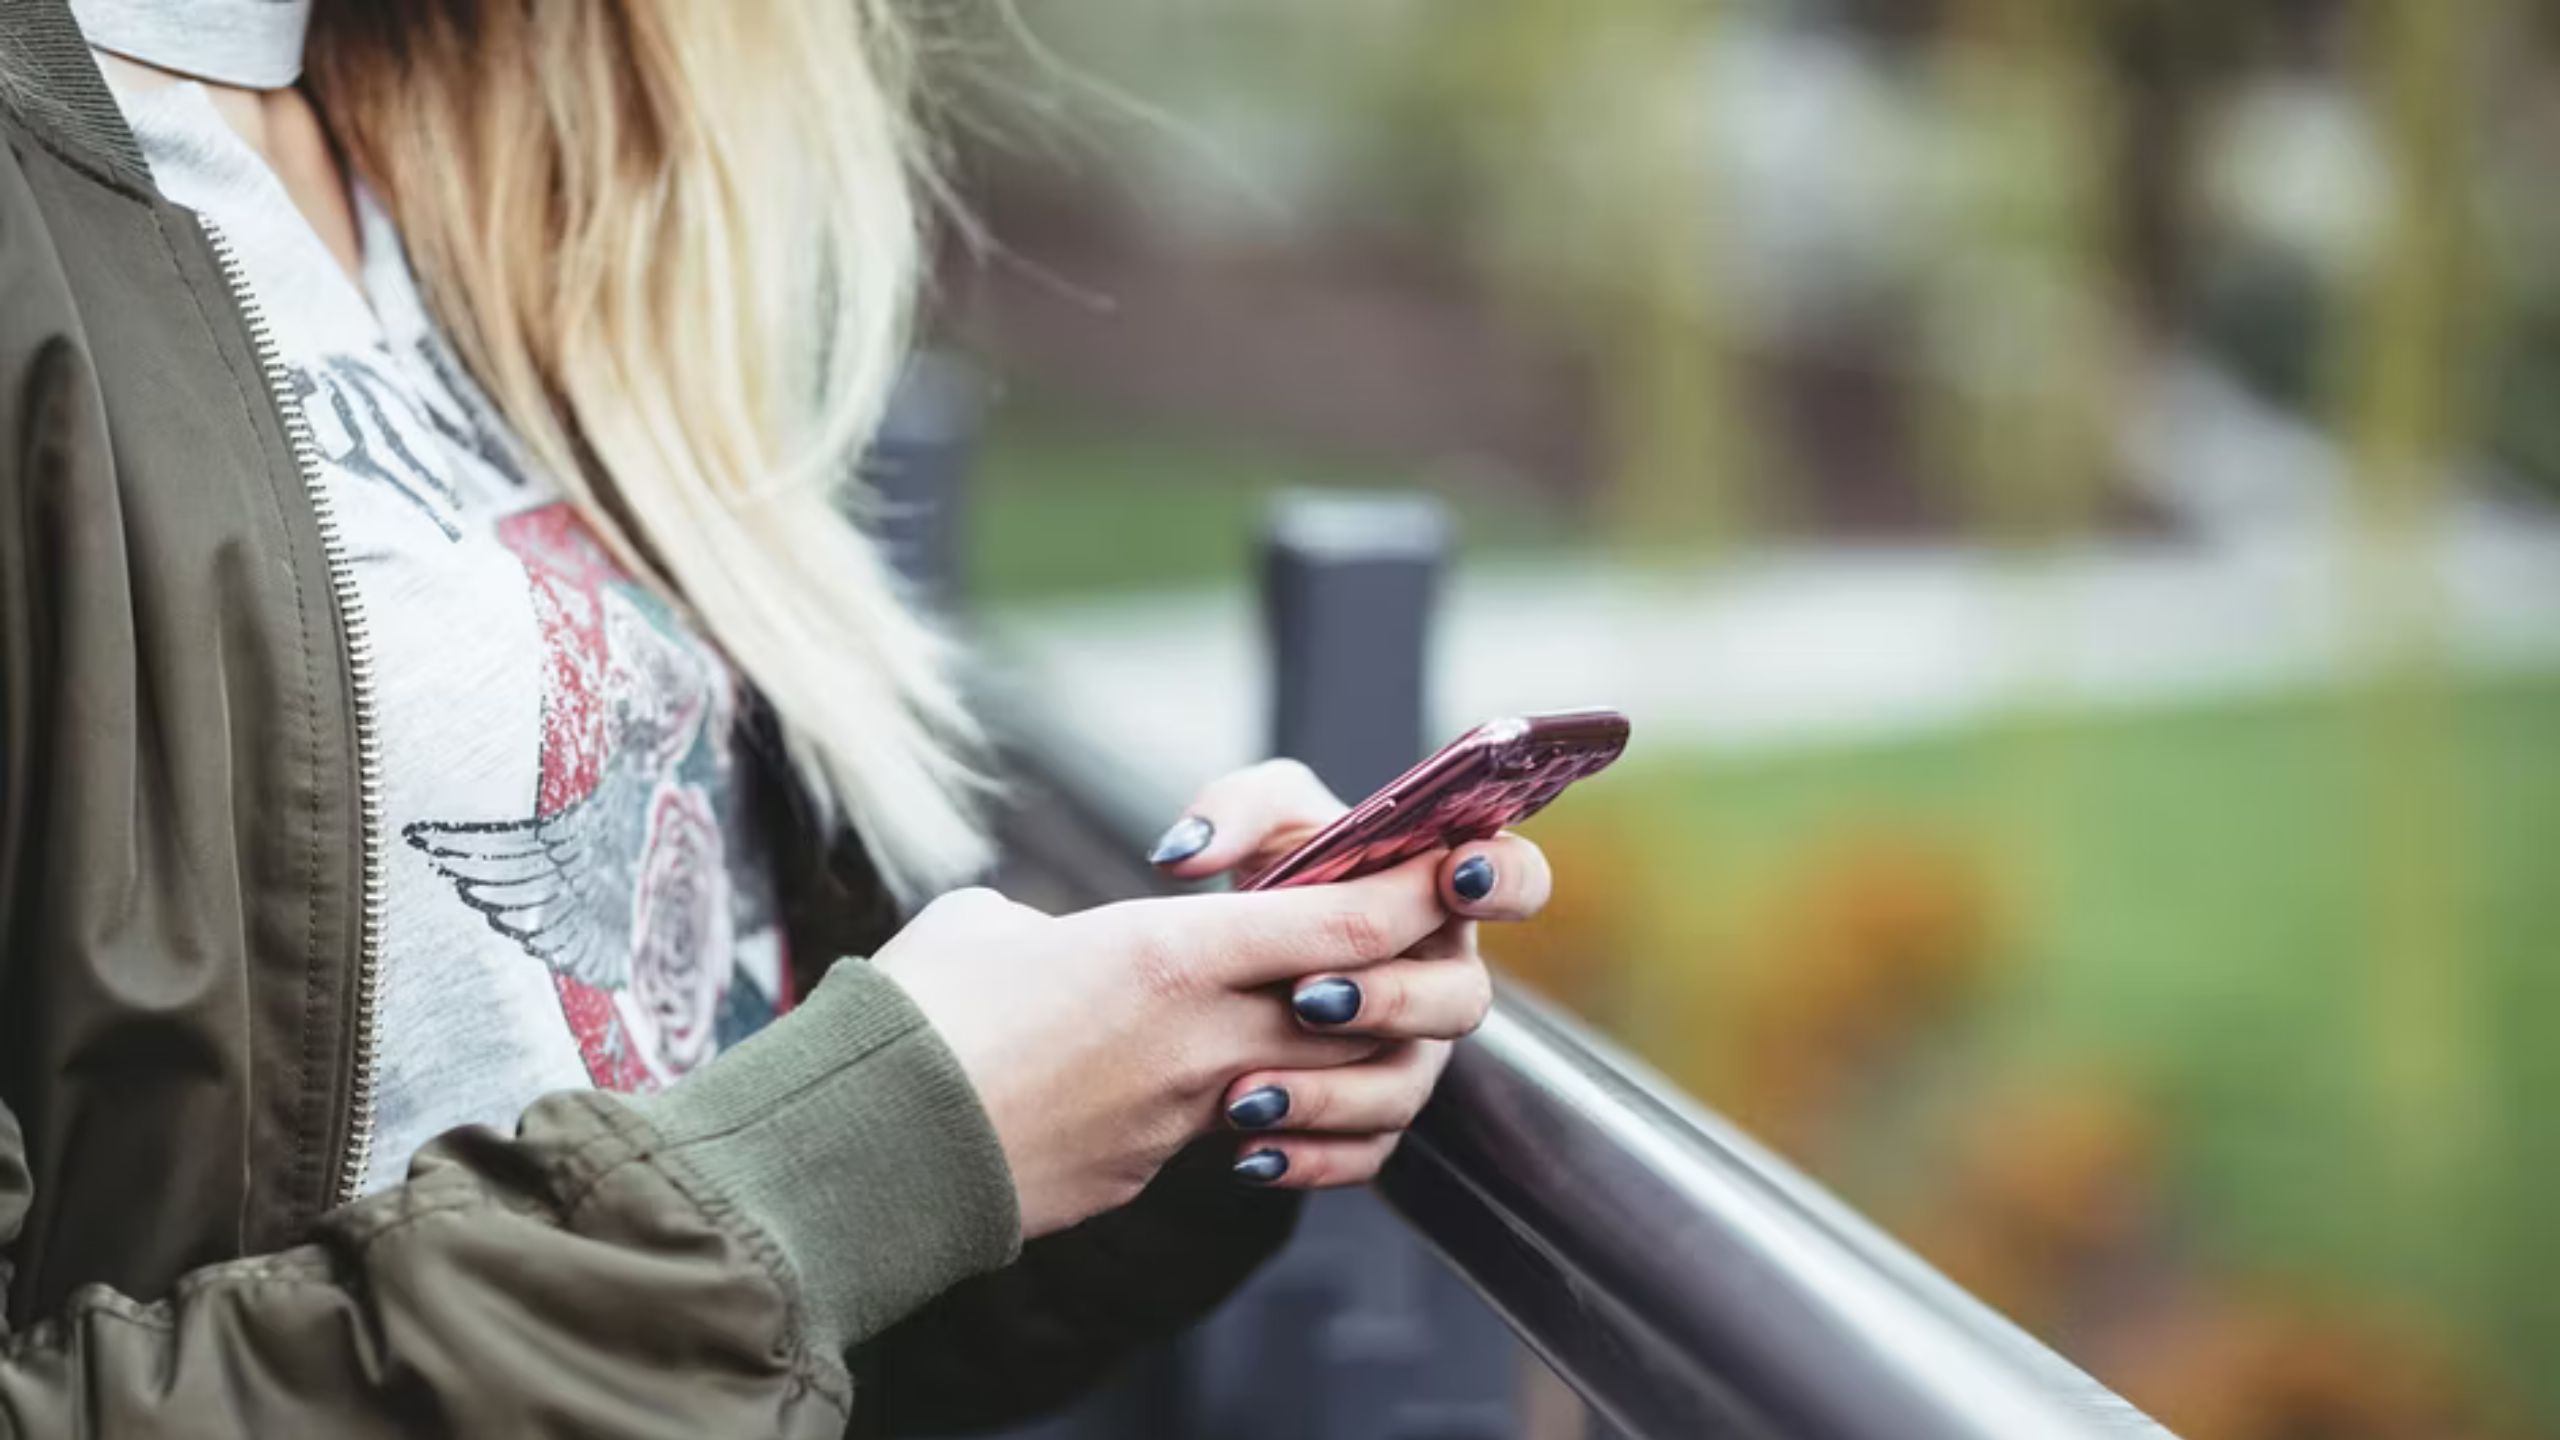 group text woman holding phone in both hands